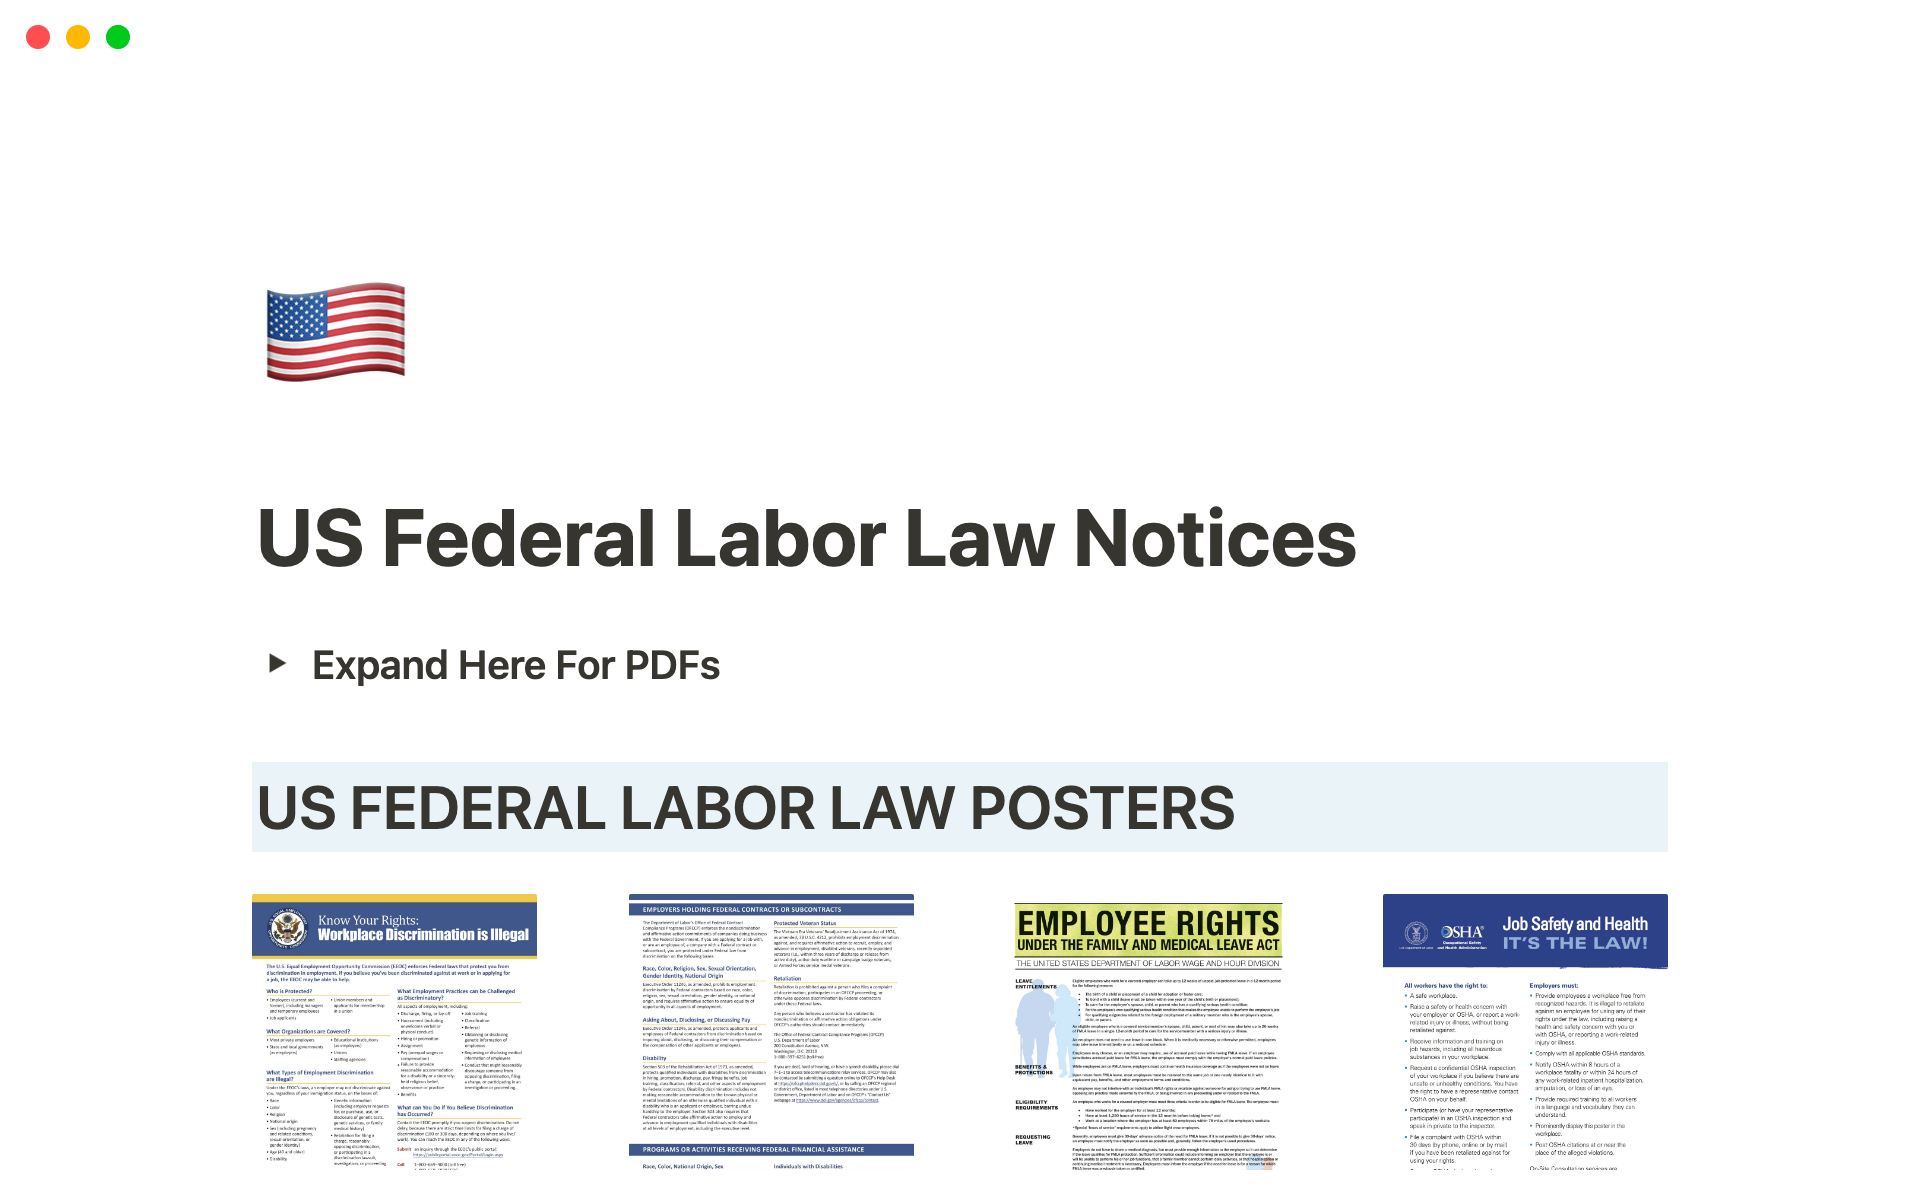 Displays United States Federal labor law notices to remote employees.